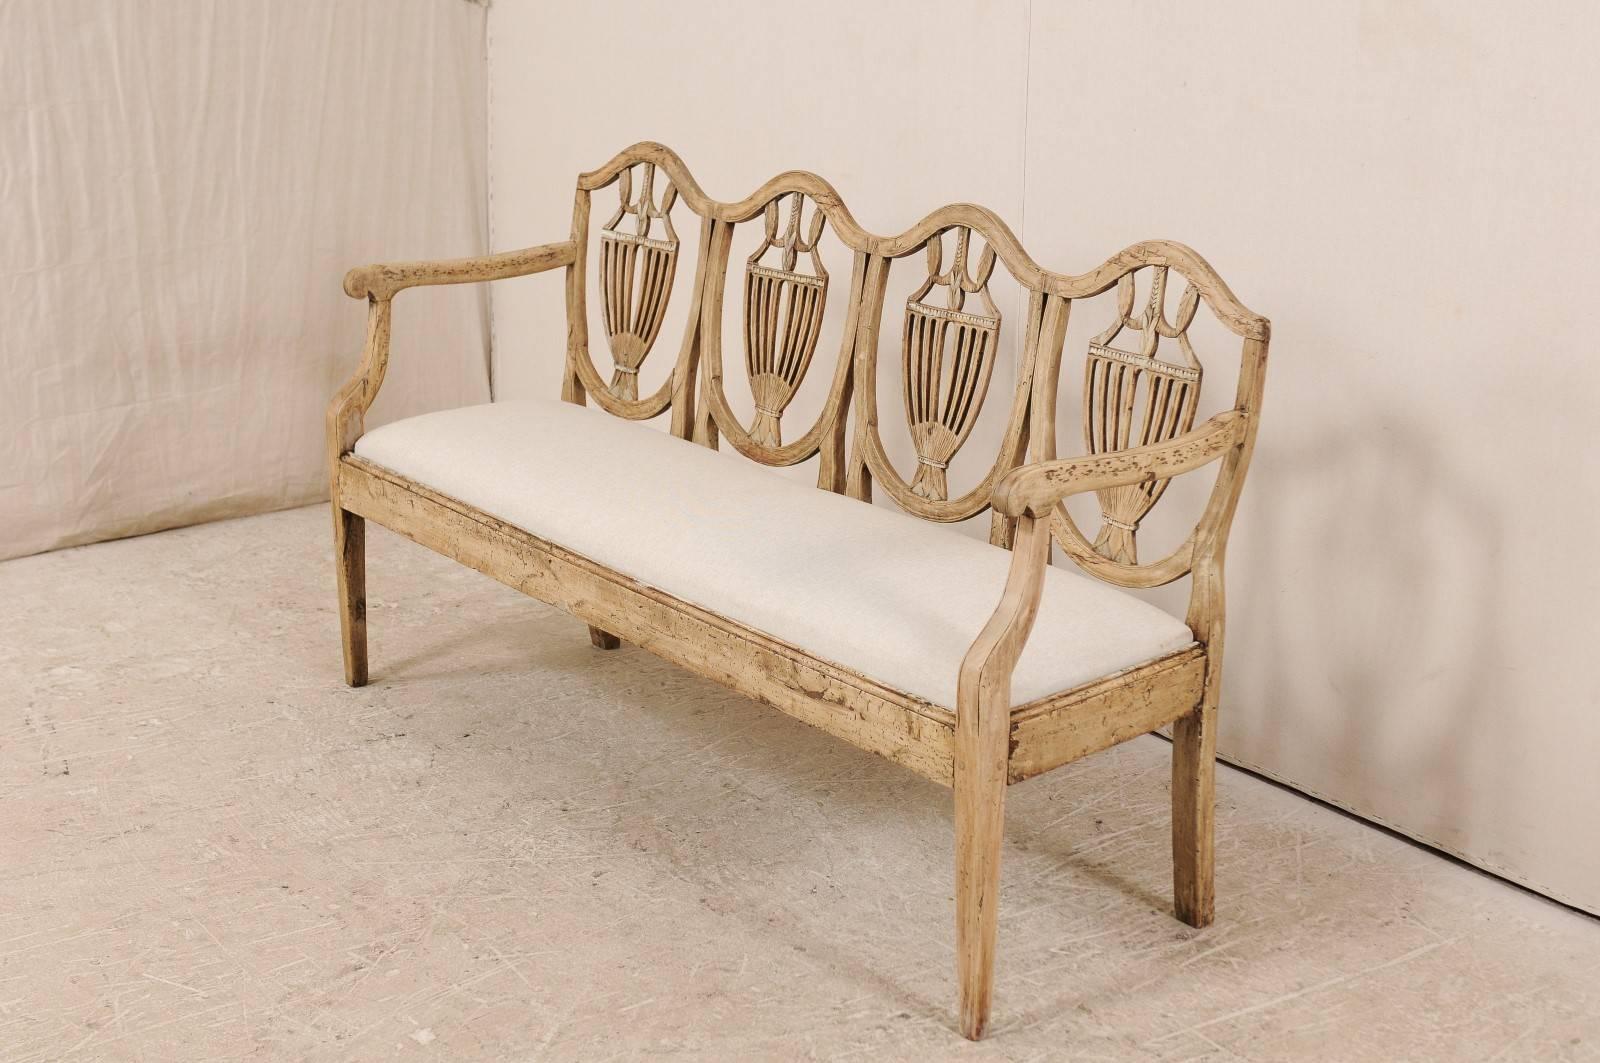 18th Century Italian Bleached Fruitwood Sofa Bench with Urn Motif Back Splat 1